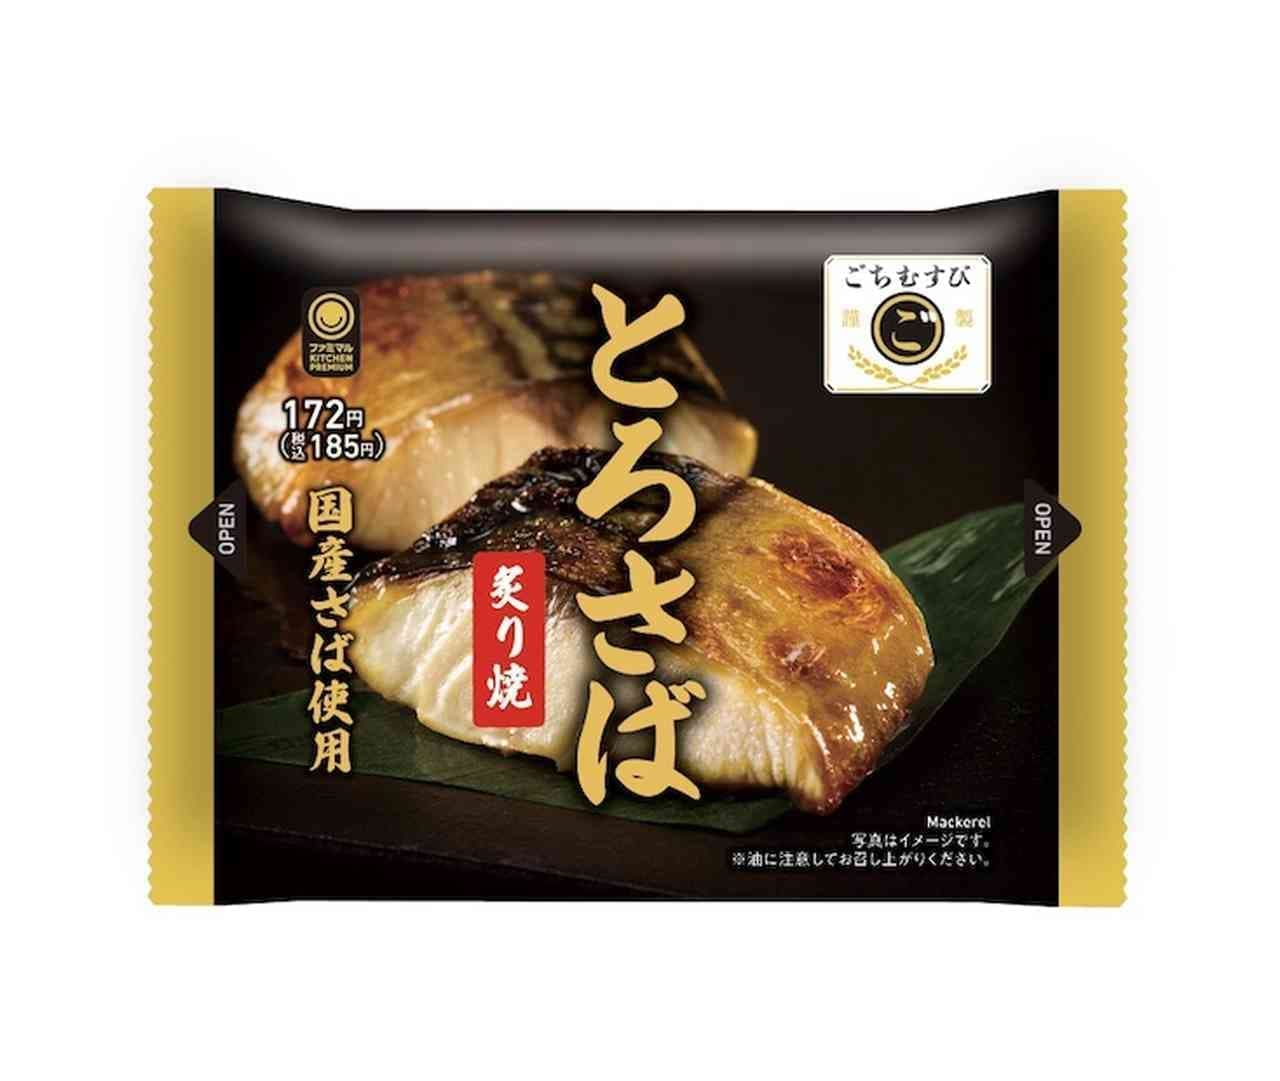 Famima "Gochimusubi" Grilled mackerel with grated yam